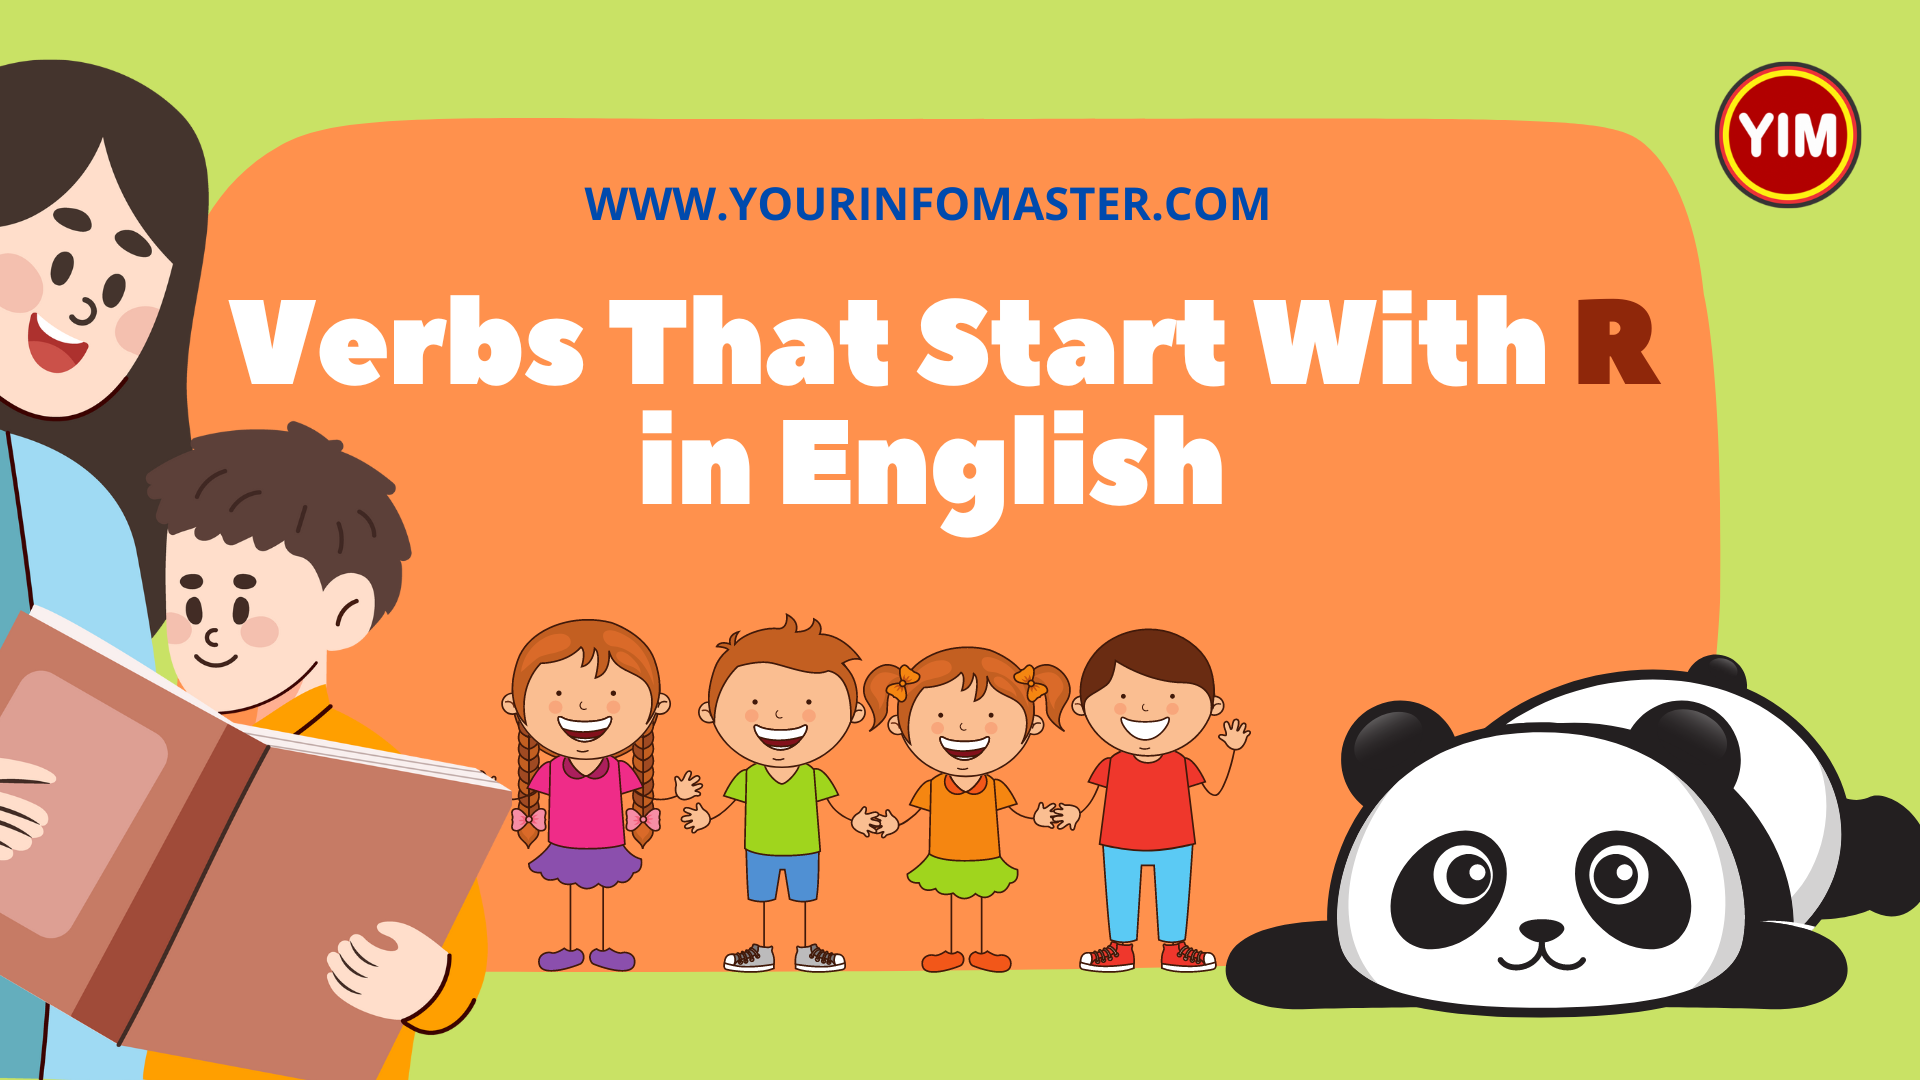 5 Letter Verbs, 5 Letter Verbs Starting With R, Action Words, Action Words That Start With R, English, English Grammar, English Vocabulary, English Words, List of Verbs That Start With R, R Action Words, R Verbs, R Verbs in English, Verbs List, Verbs That Start With R, Vocabulary, Words That Start with r